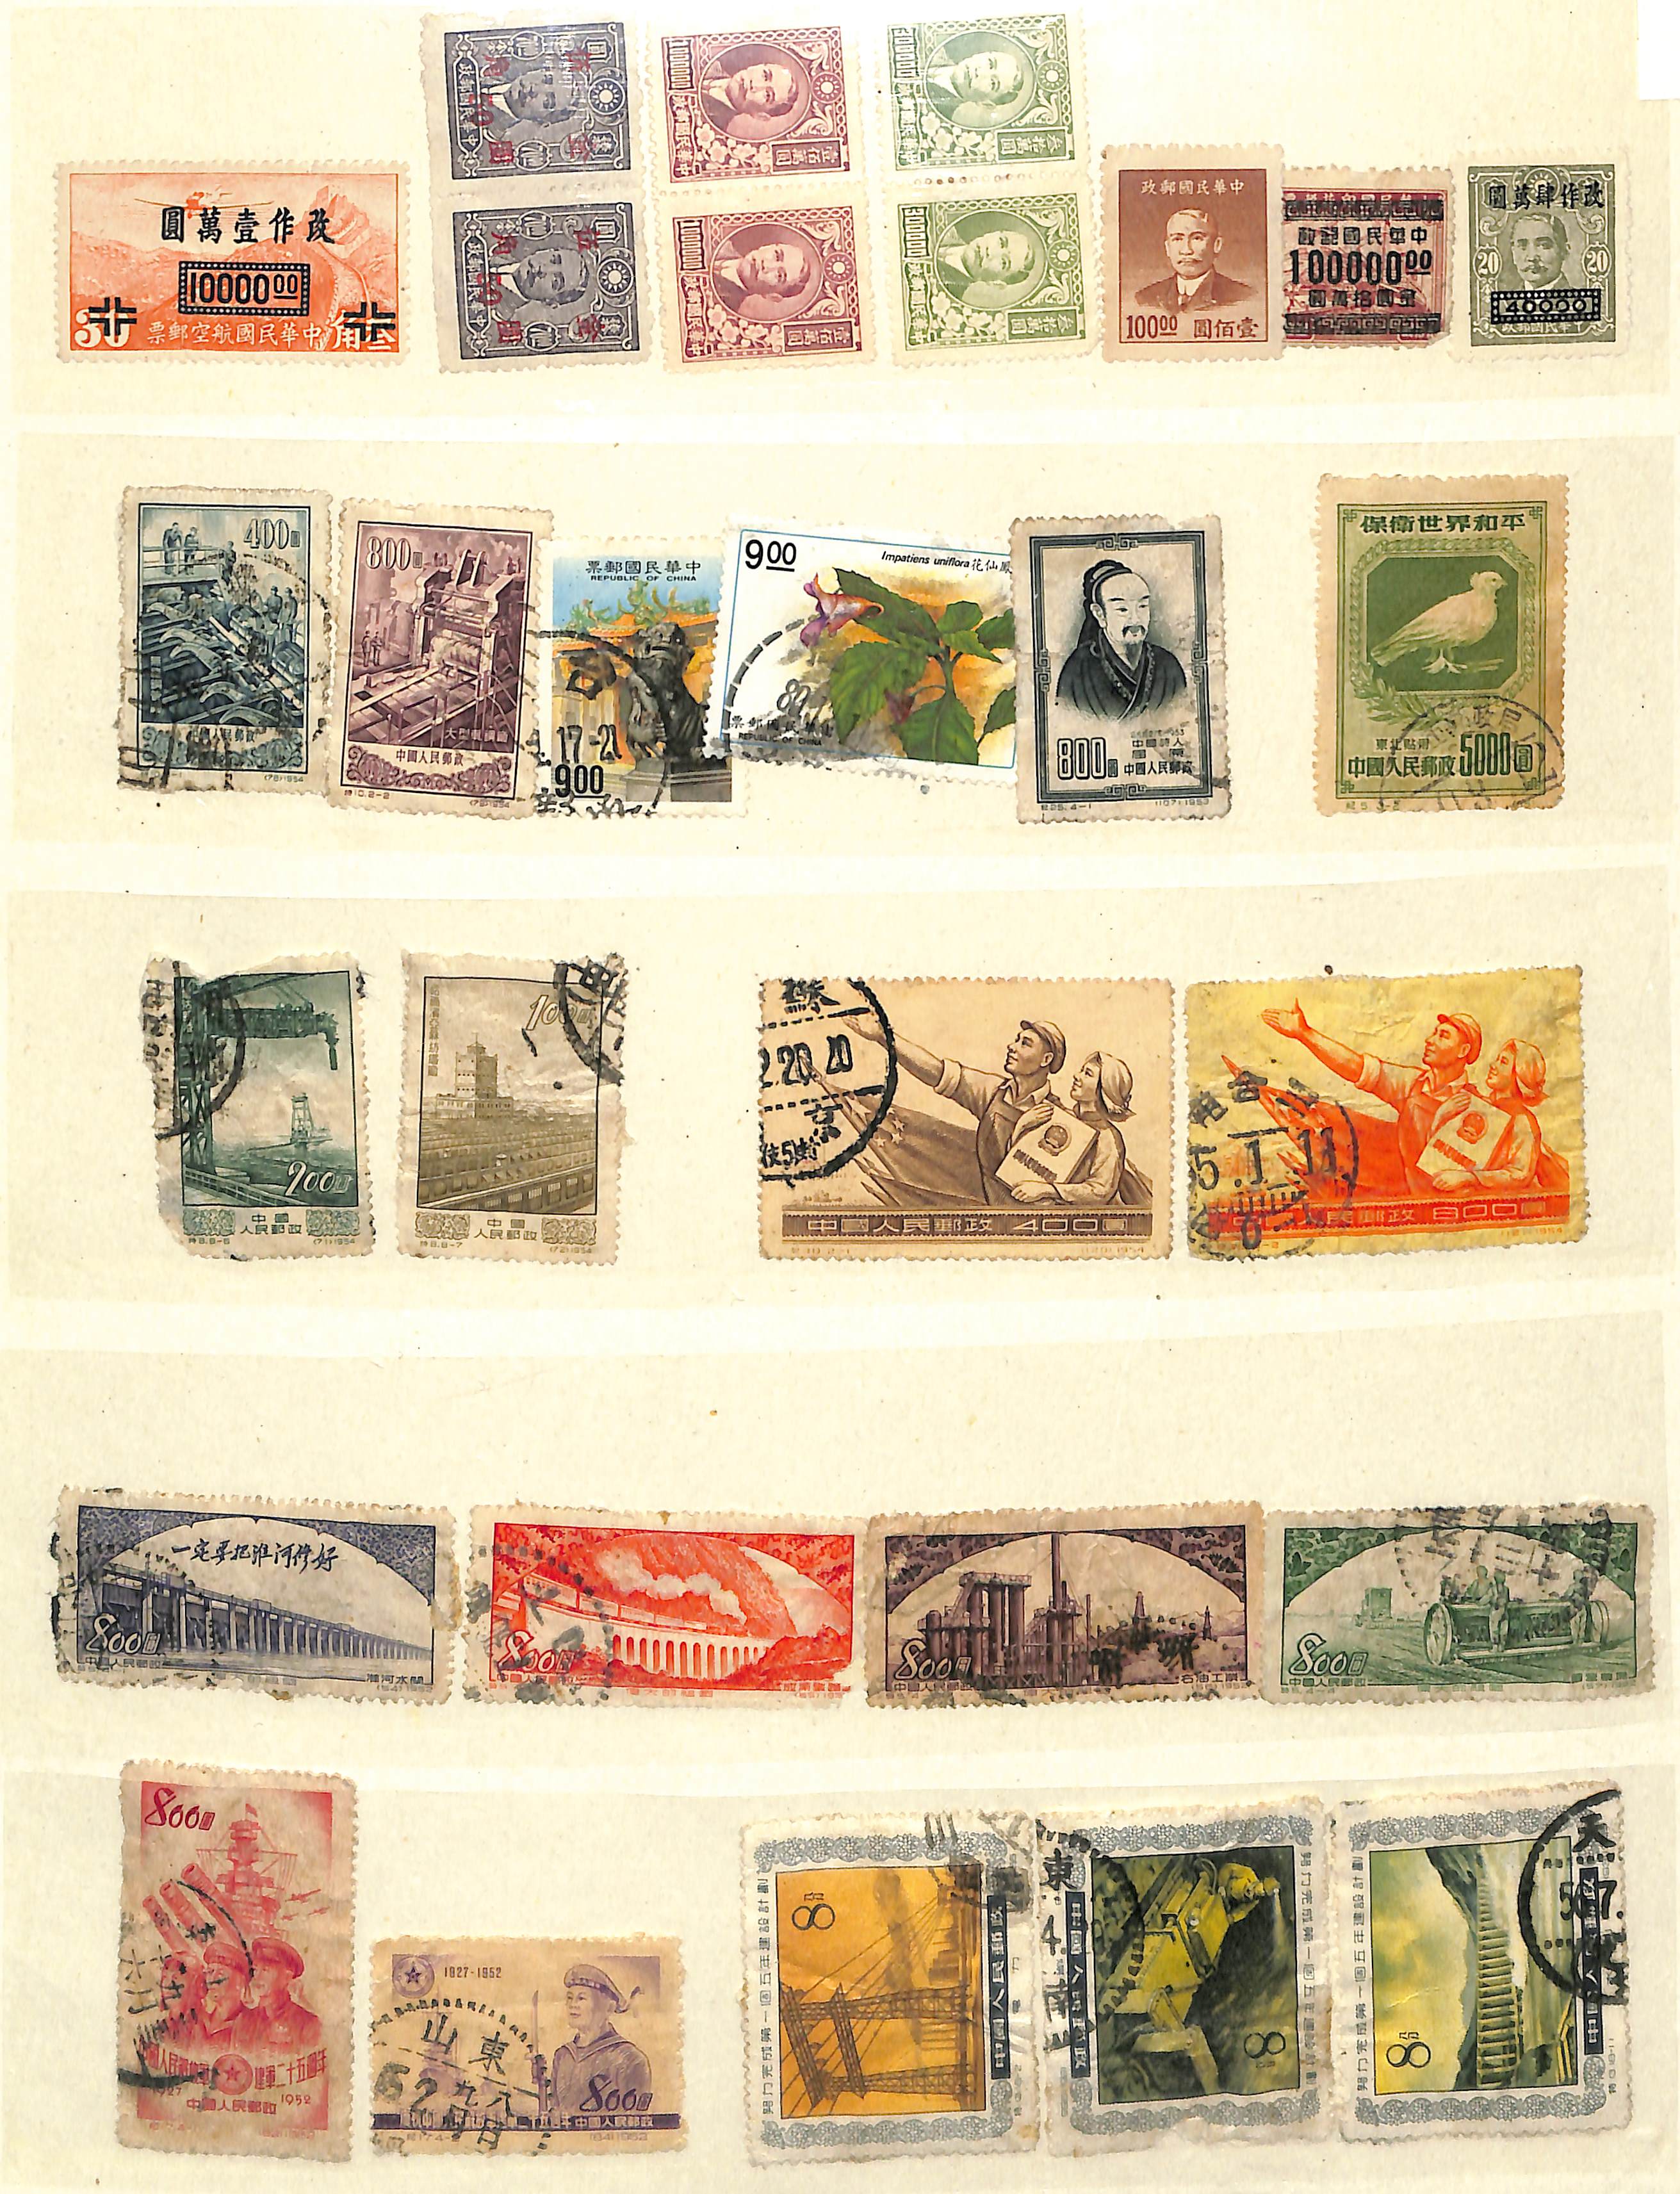 1949-80 Used collection, most postally used rather than C.T.O, including S.G. 2968 (faults), etc.,